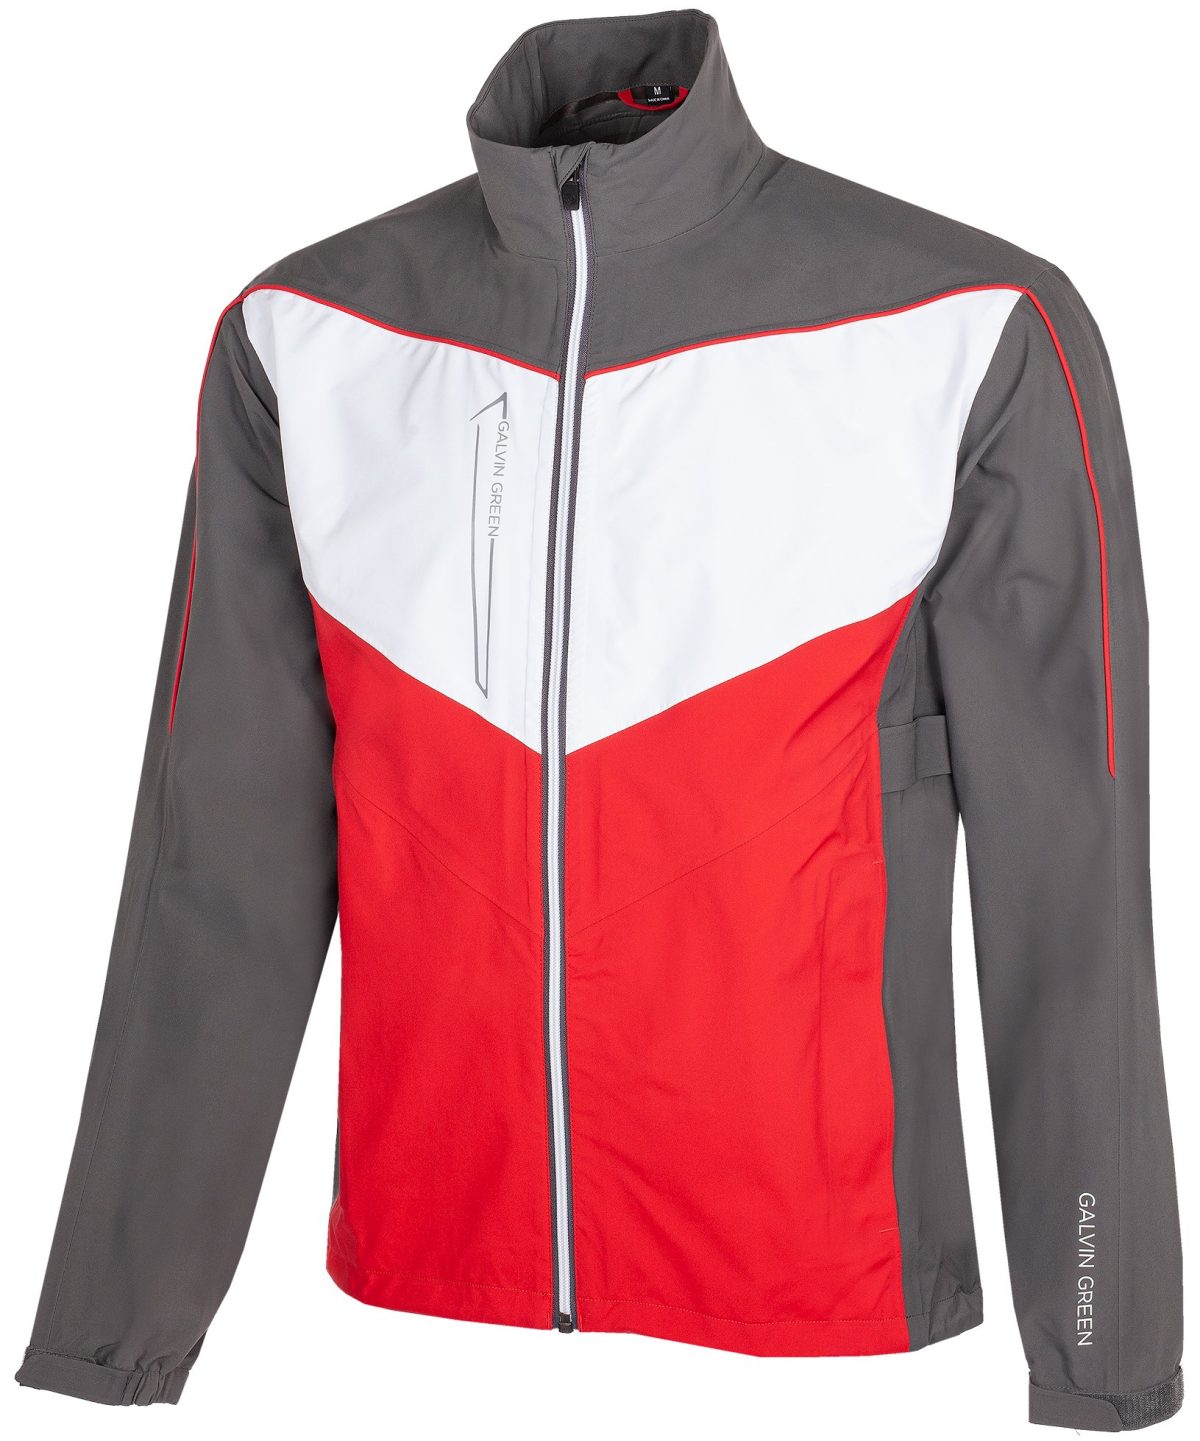 Galvin Green Men's Armstrong Gore-Tex Golf Rain Jacket in Forged Iron/Red/White, Size S